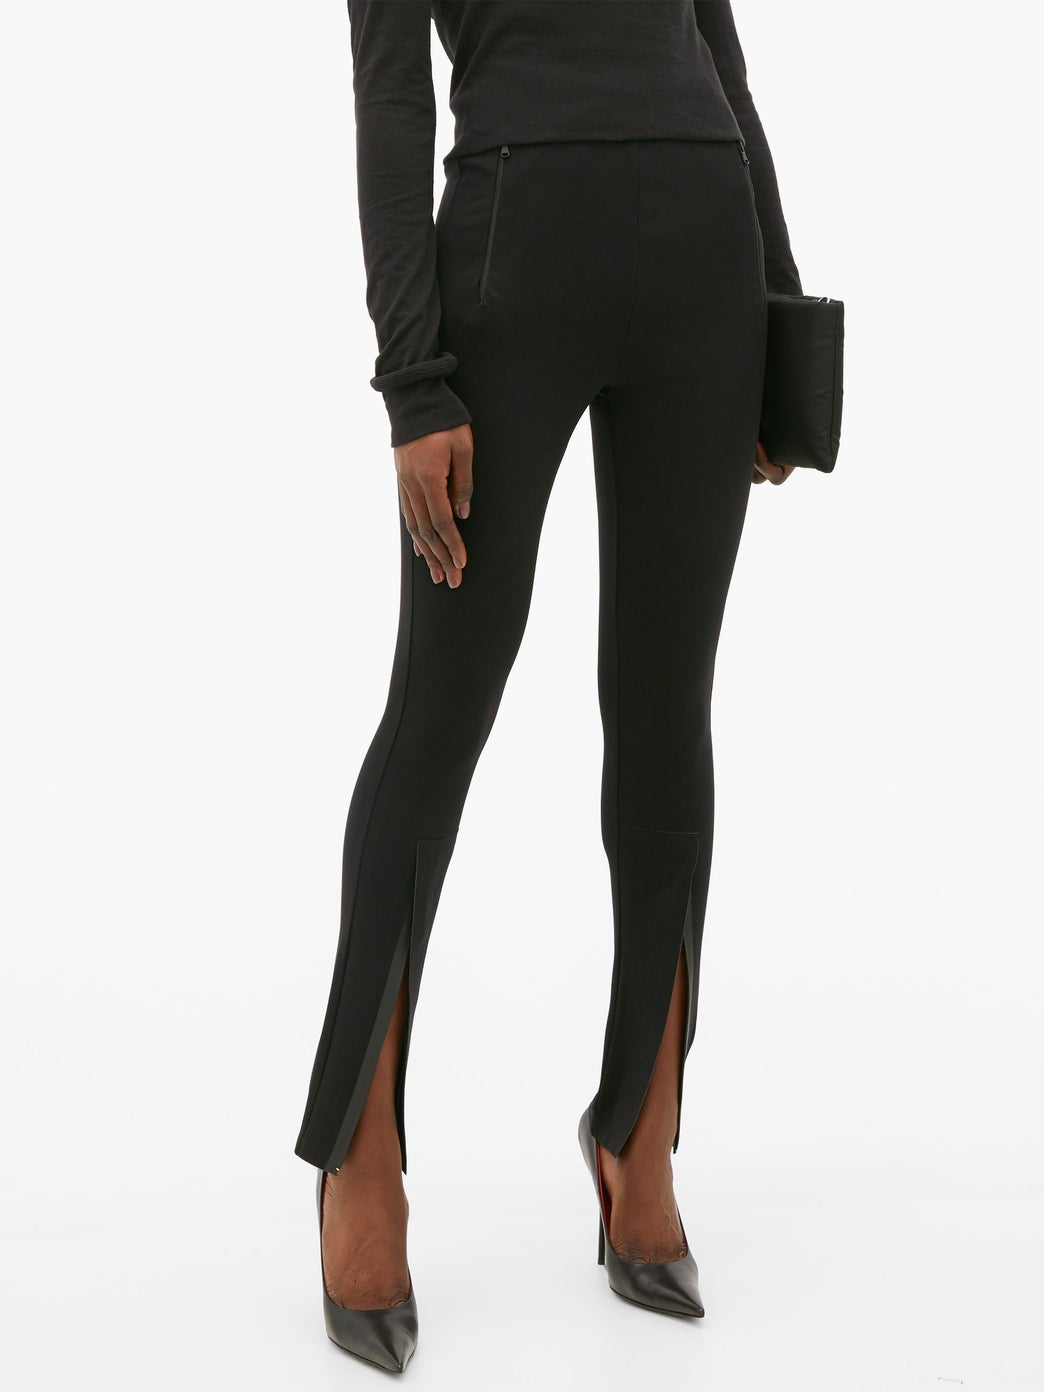  Roupeiro.NYC Release 05 Slit-Front Jersey Leggings